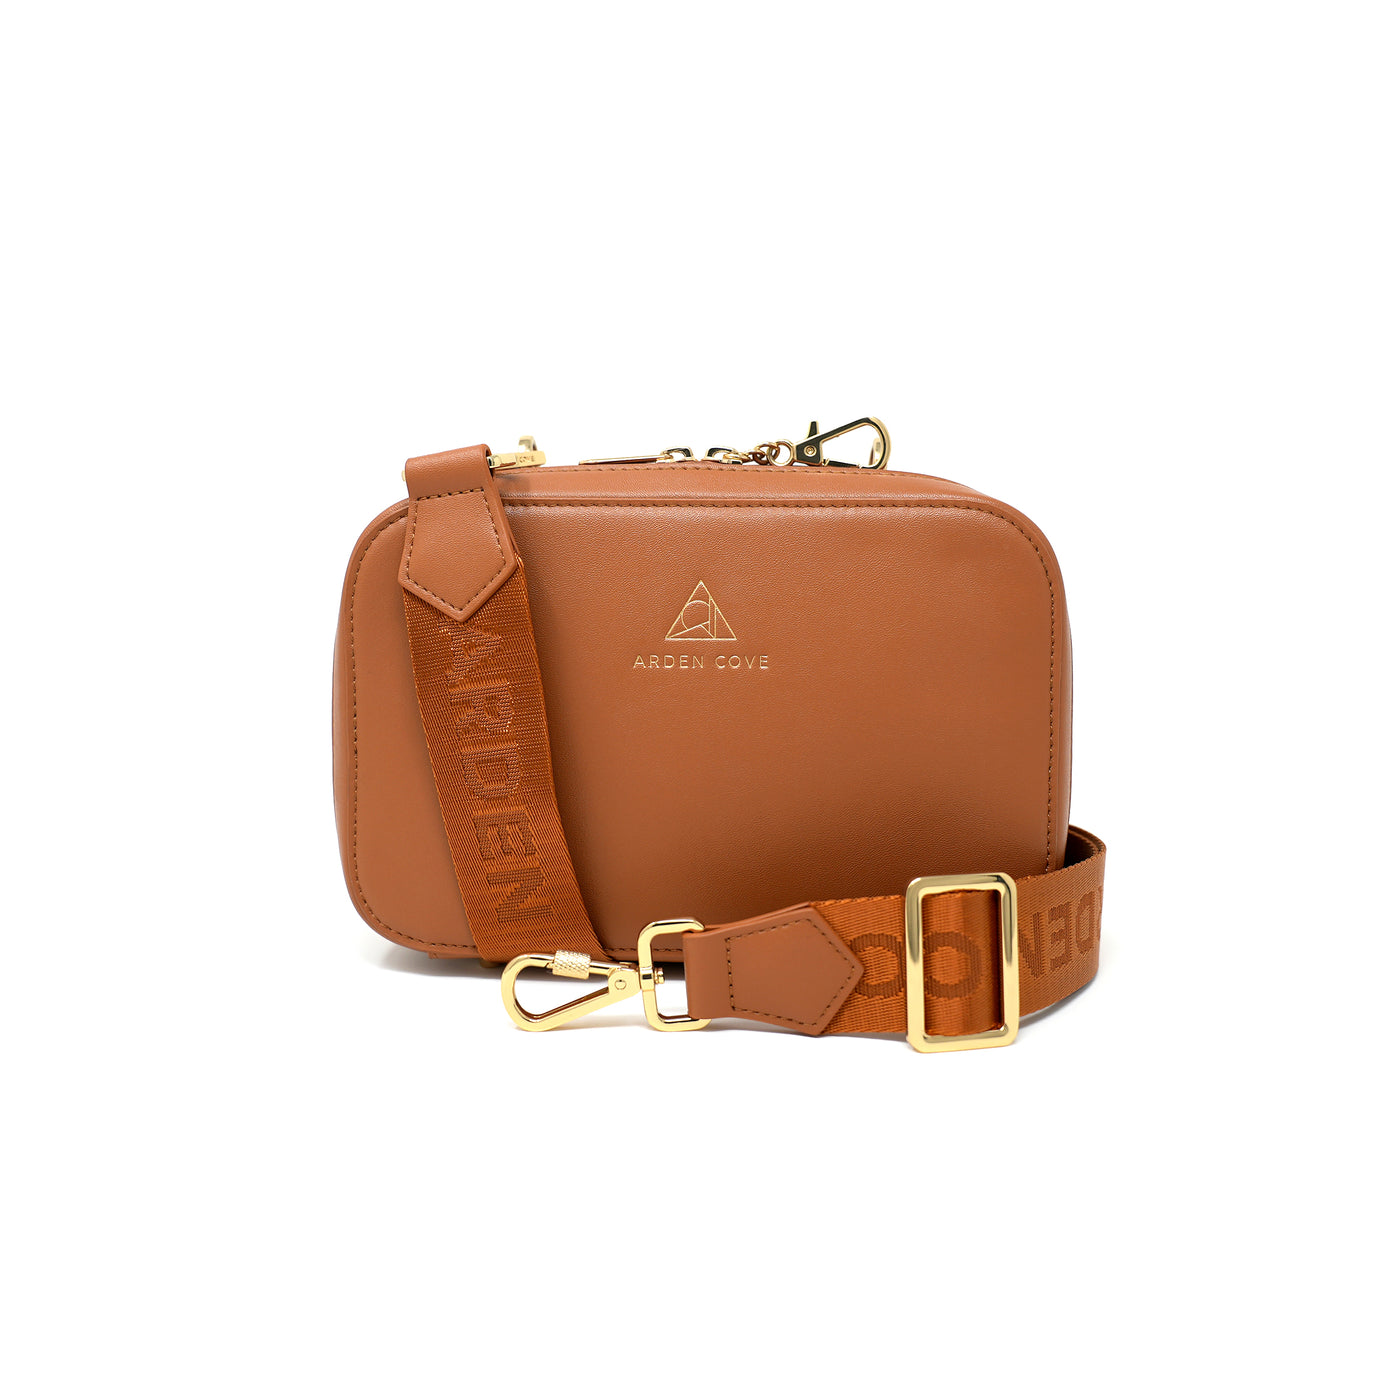 Anti-theft Water-resistant Travel Crossbody - Elise Crossbody in Brown Gold with nylon jacquard & locking clasps straps - front view - Arden Cove